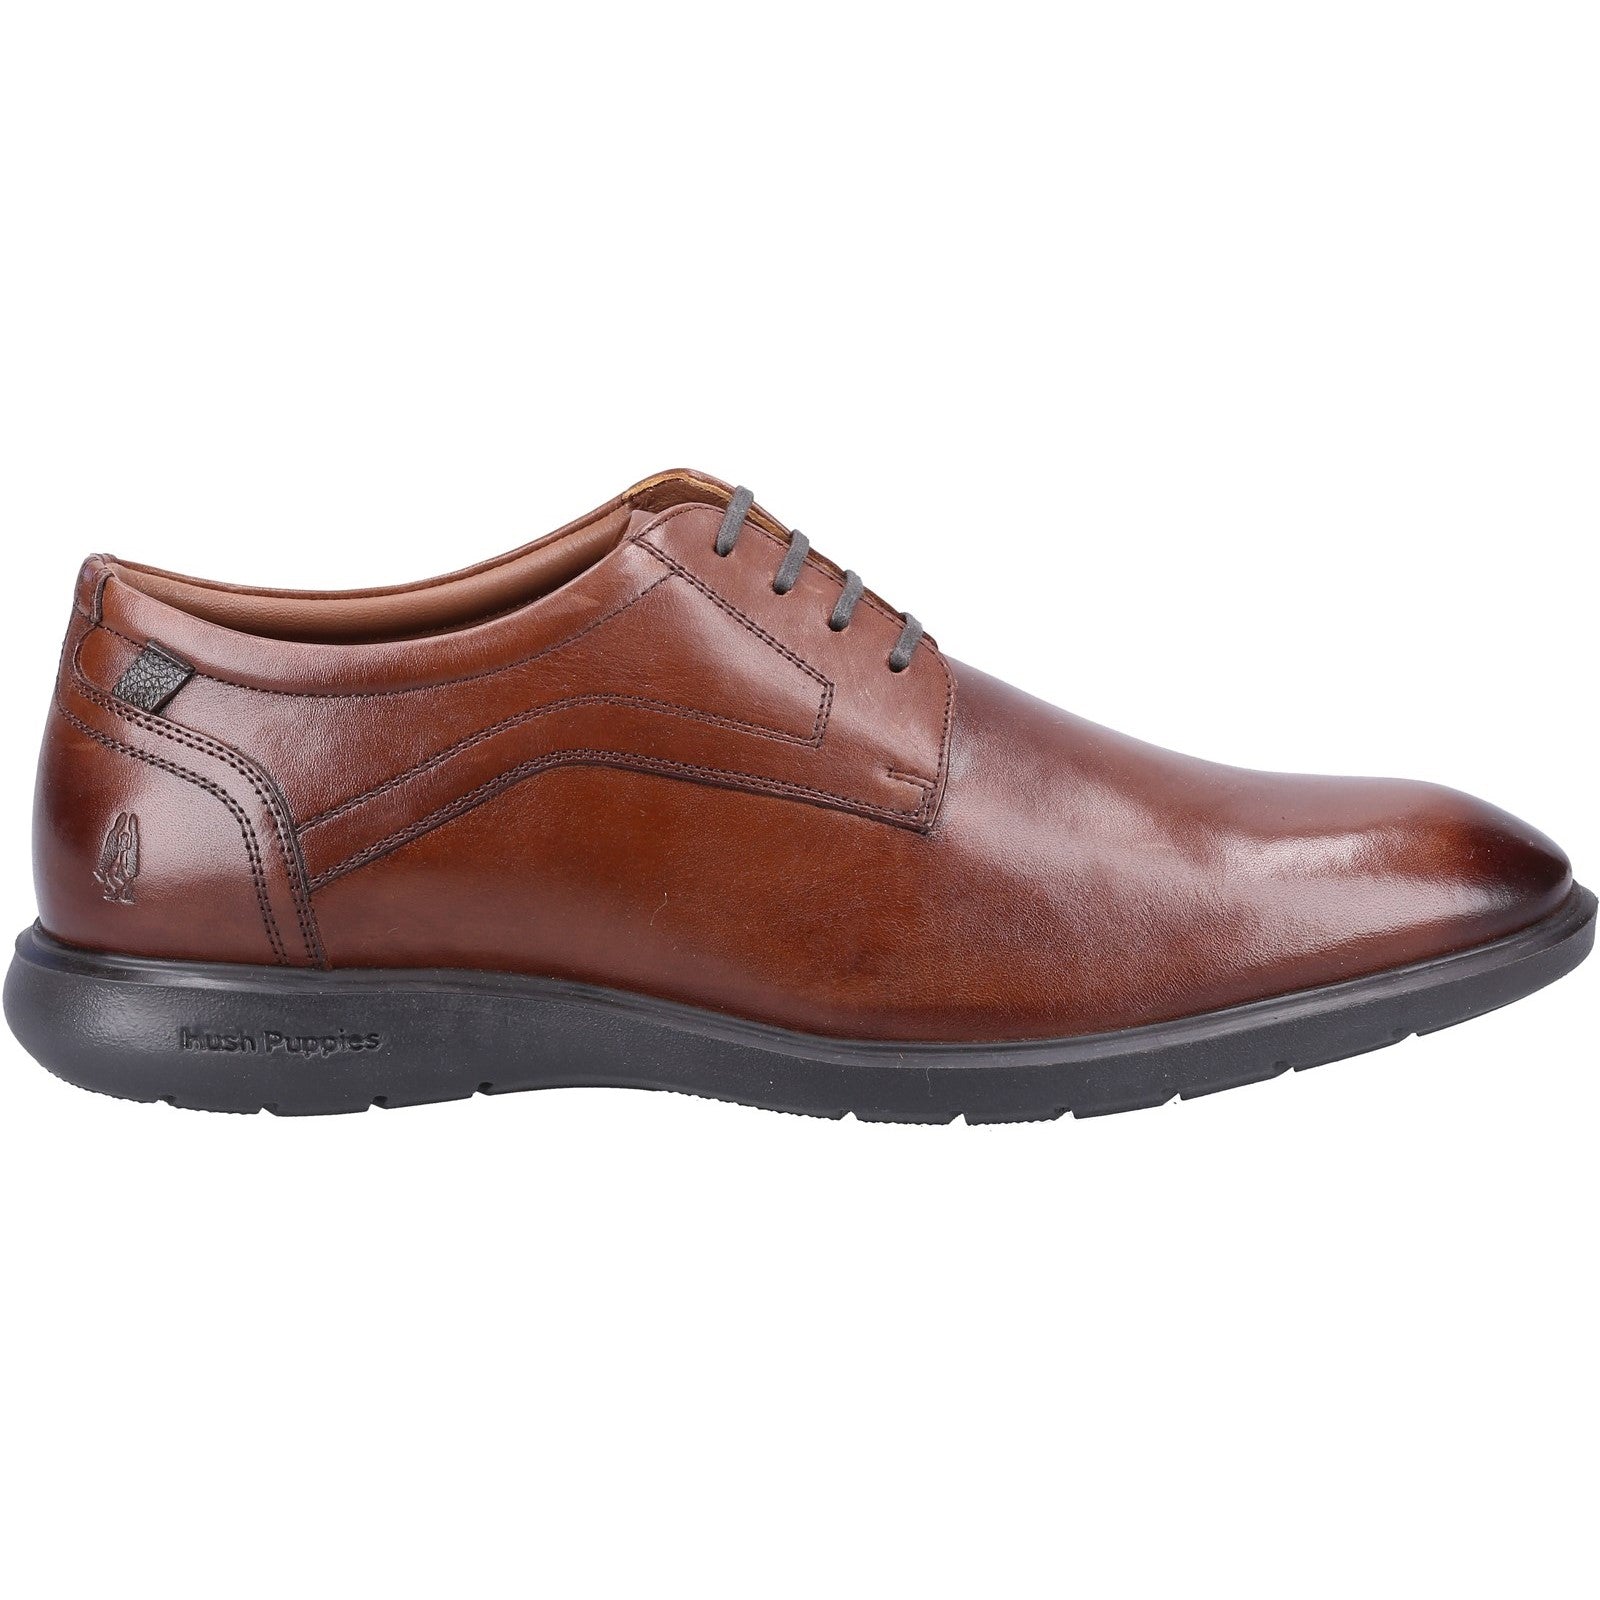 Hush Puppies Mens Amos Leather Shoe - Brown